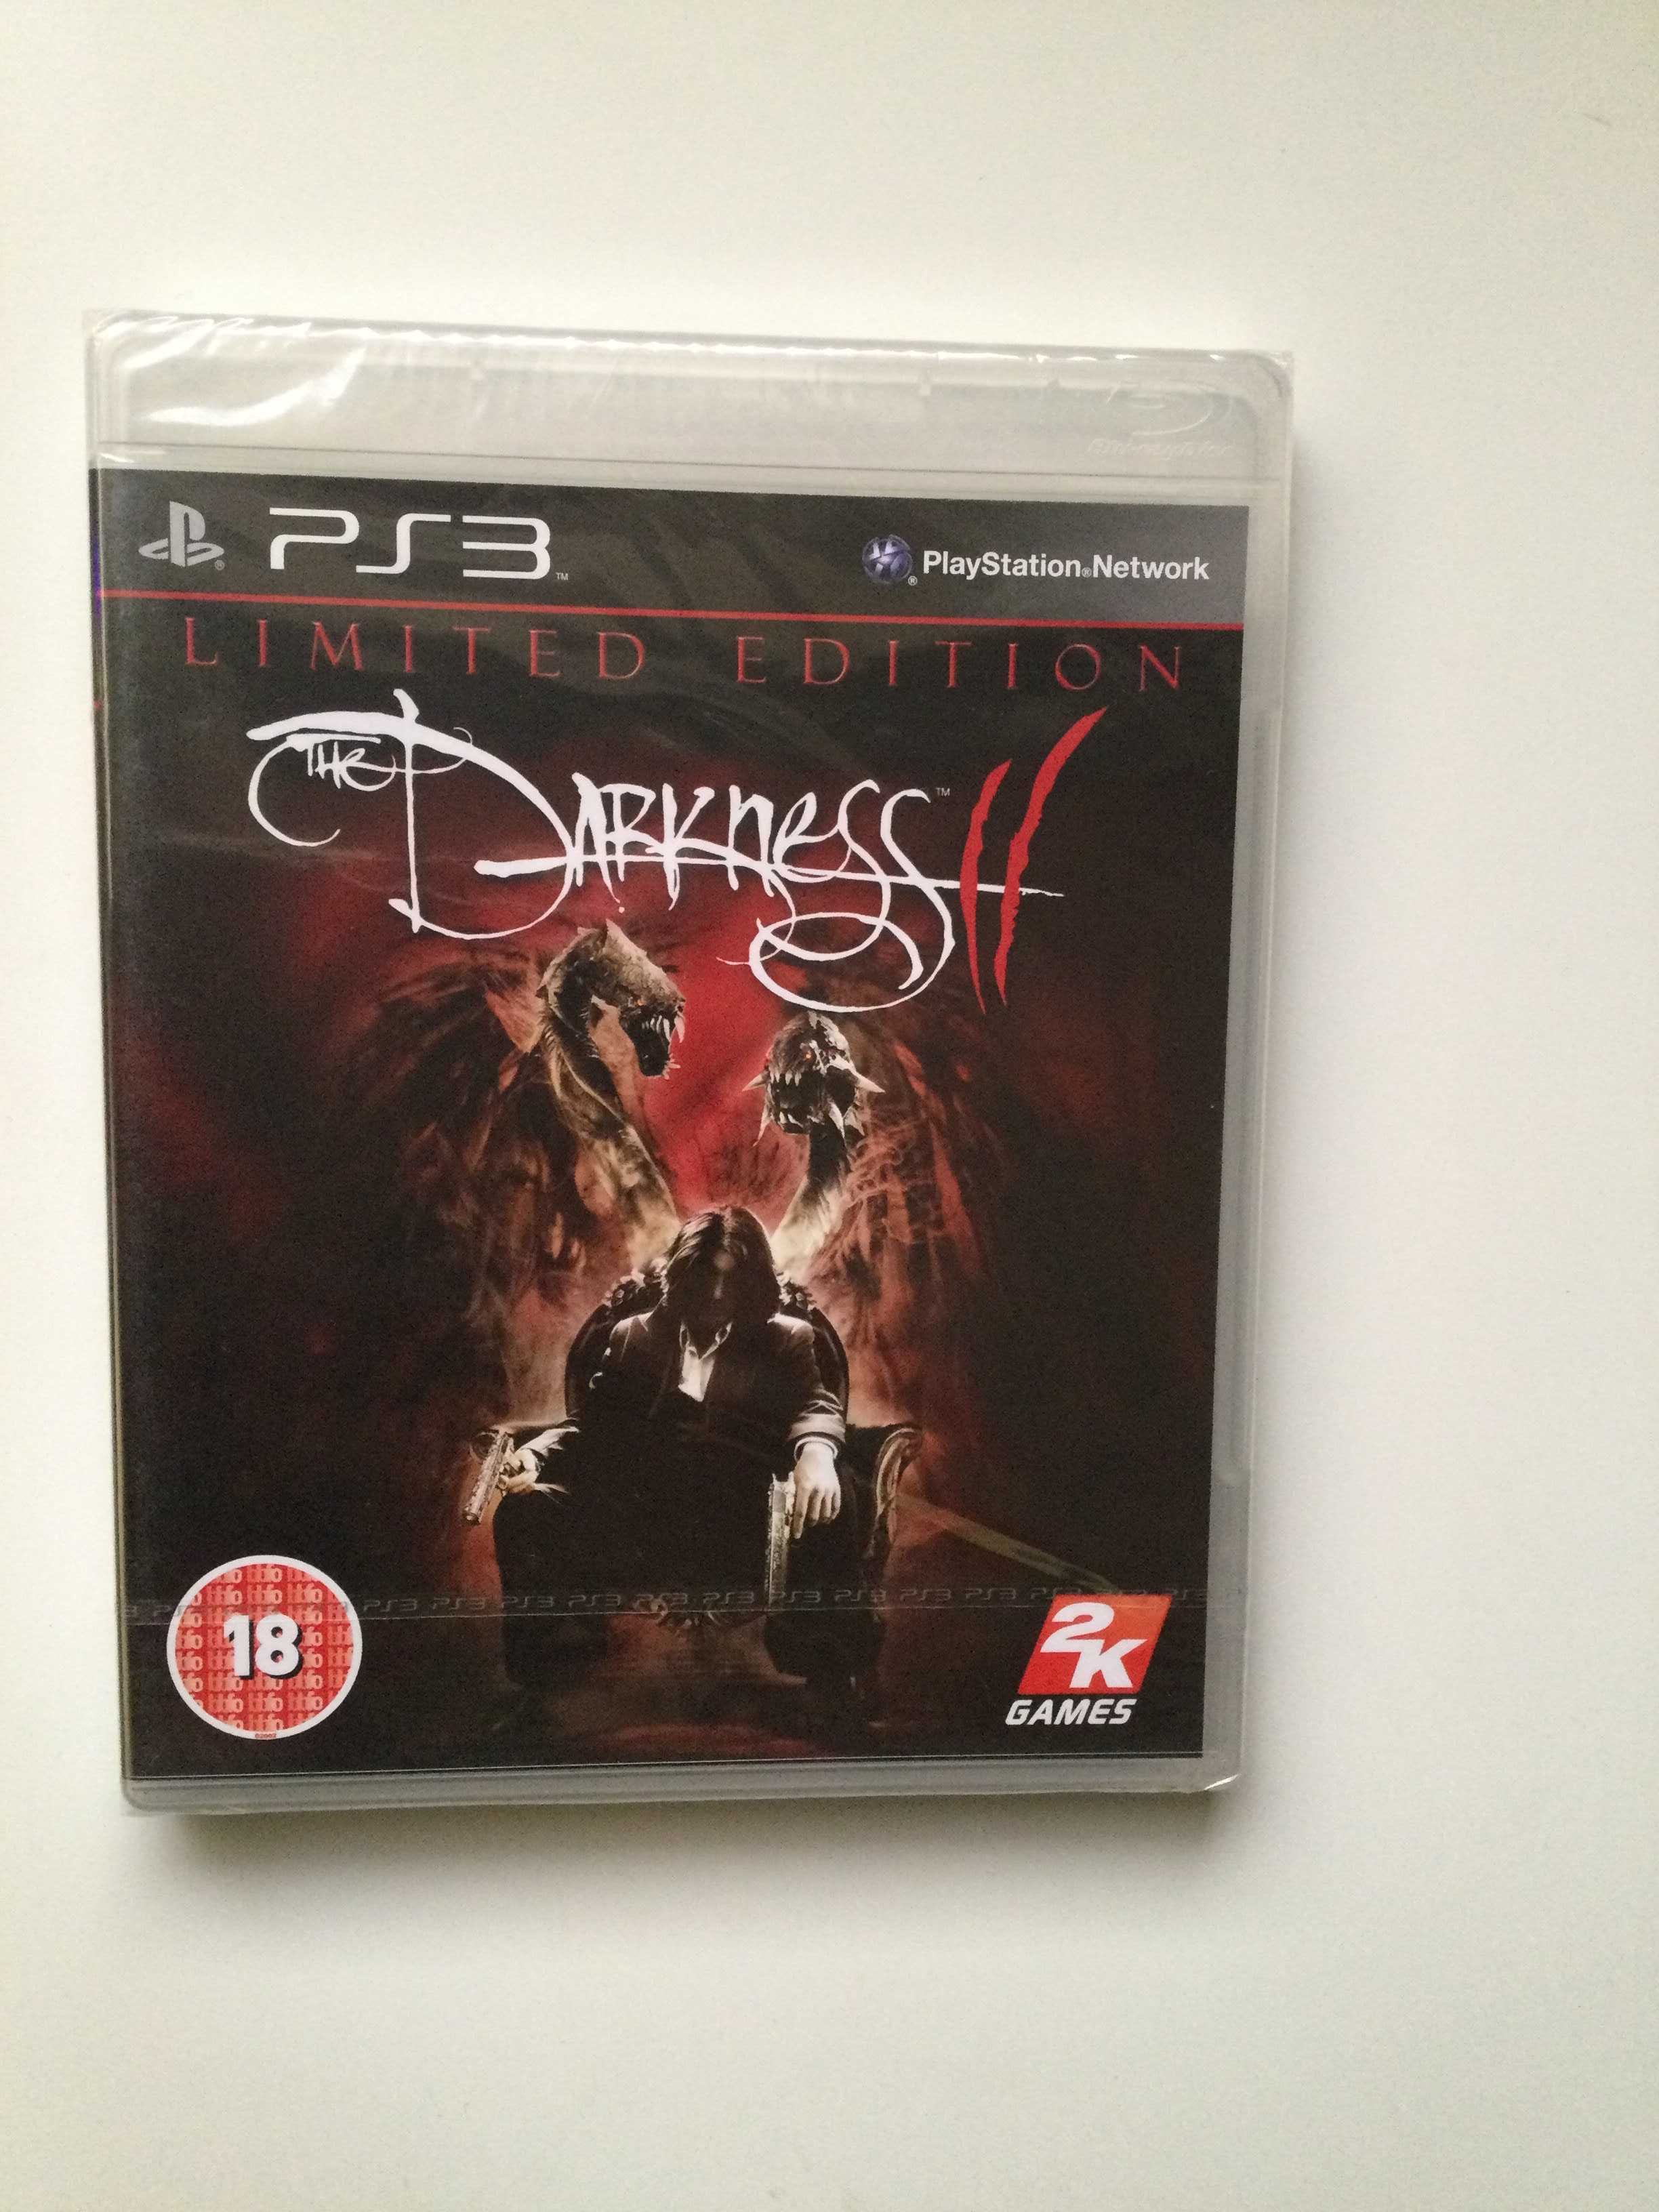 PS3 - The Darkness II Limited Edition (selado)